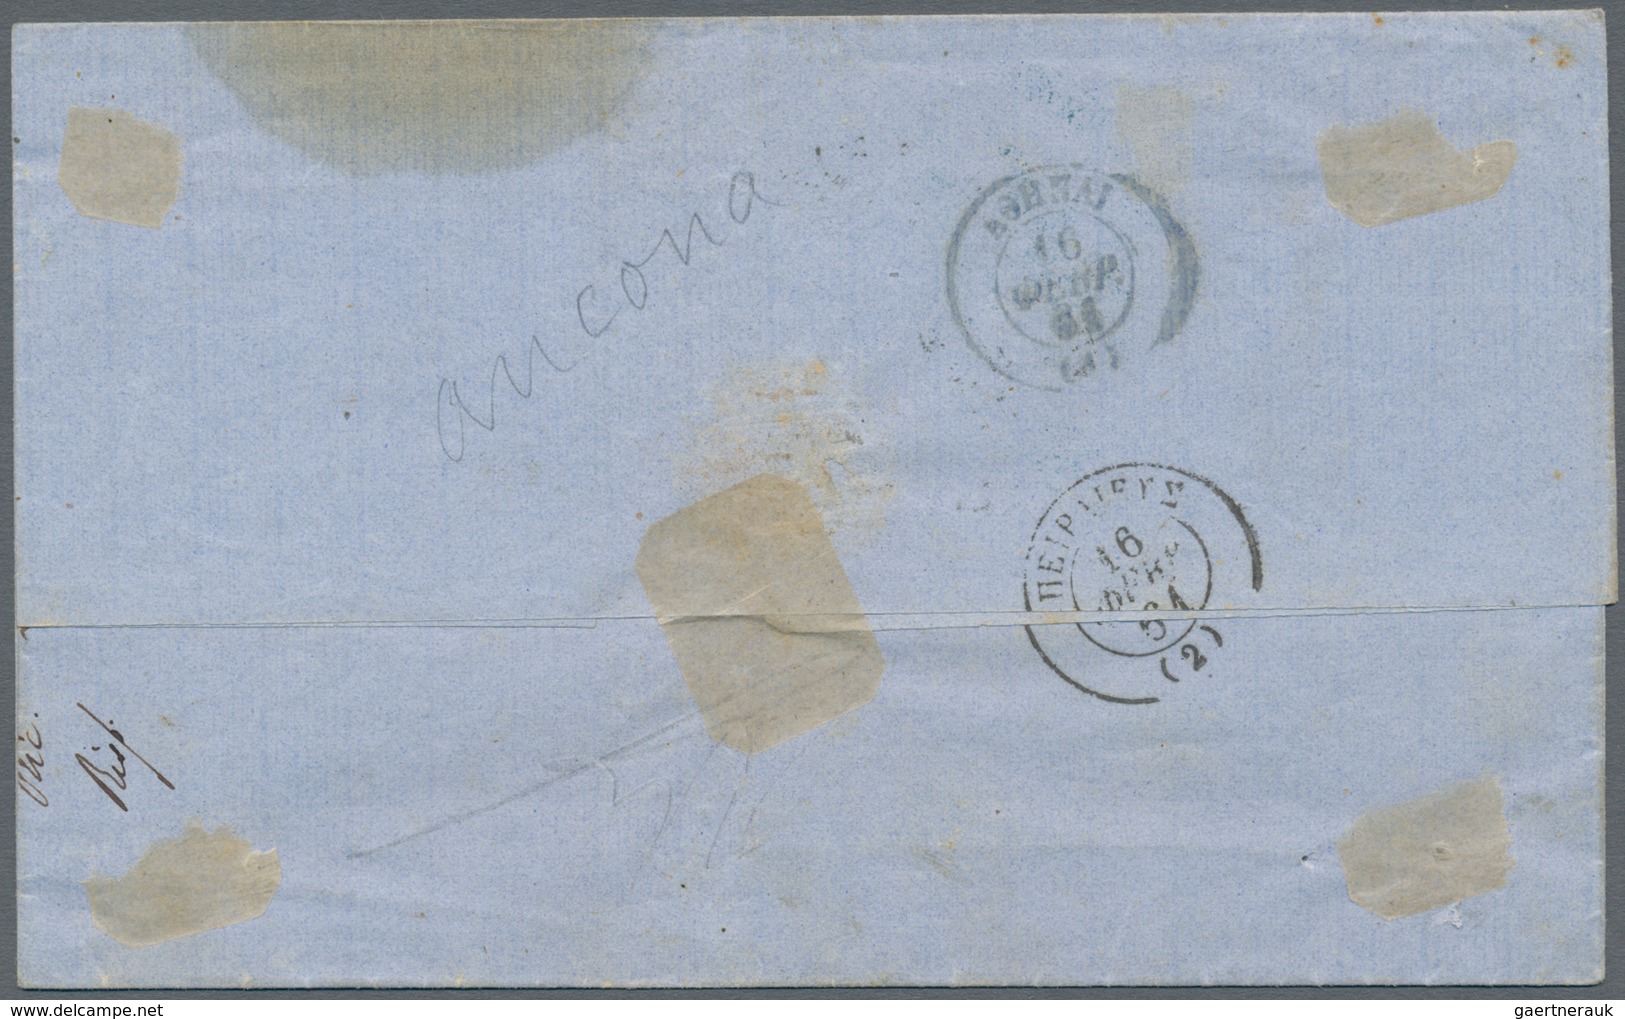 Italien: 1861, 20 C. Blue Imperf Single On Folded Envelope Tied By "ANCONA 10/FEB/61" Cds. And Blue - Mint/hinged